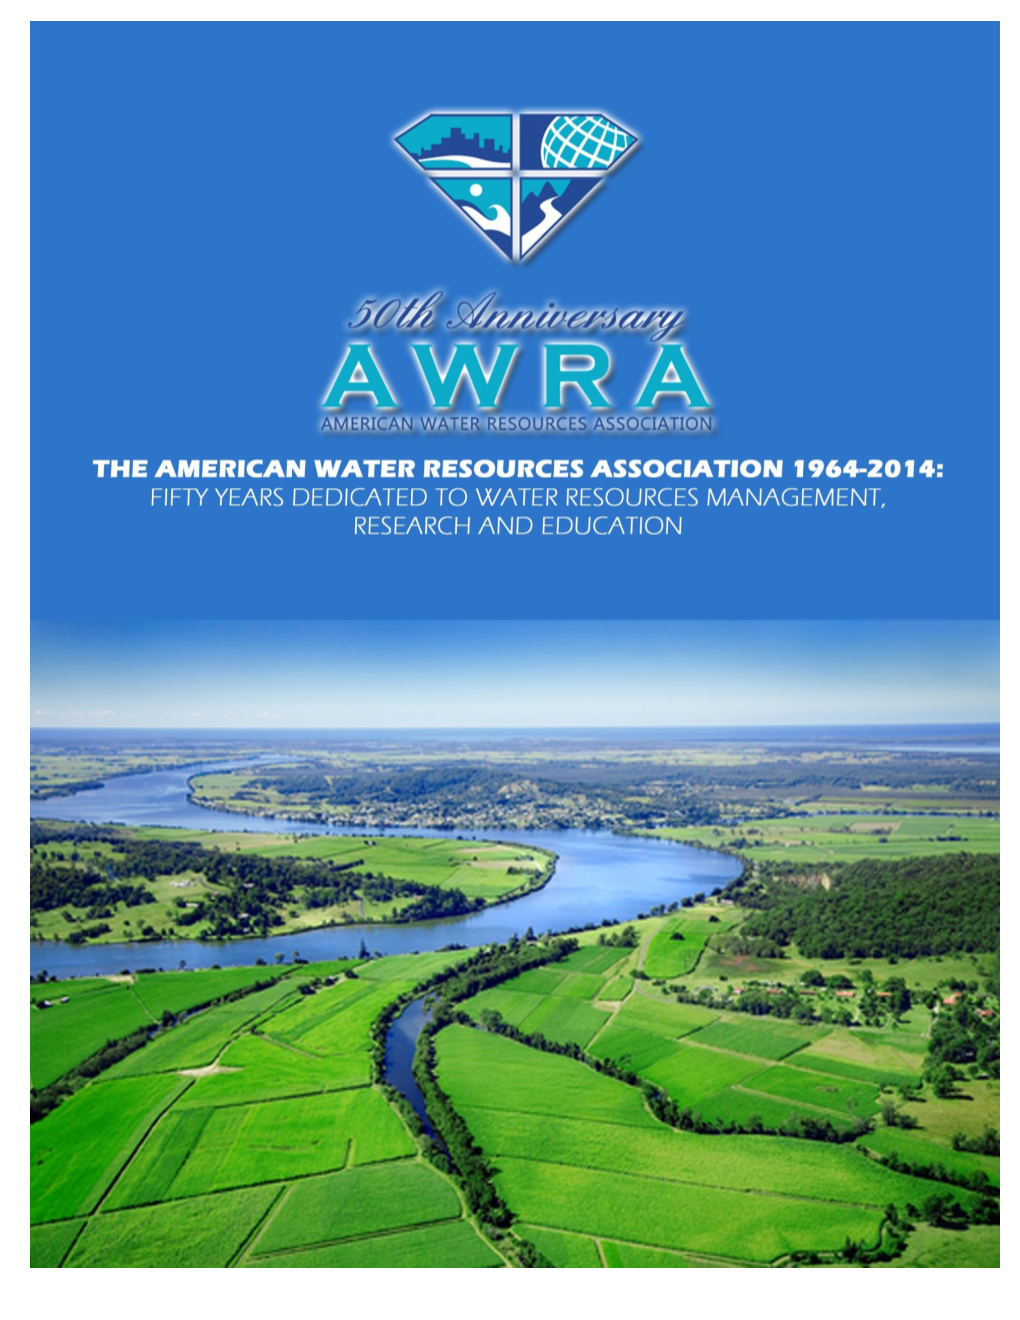 The American Water Resources Association 1964-2014: Fifty Years Dedicated to Water Resources Management, Research and Education